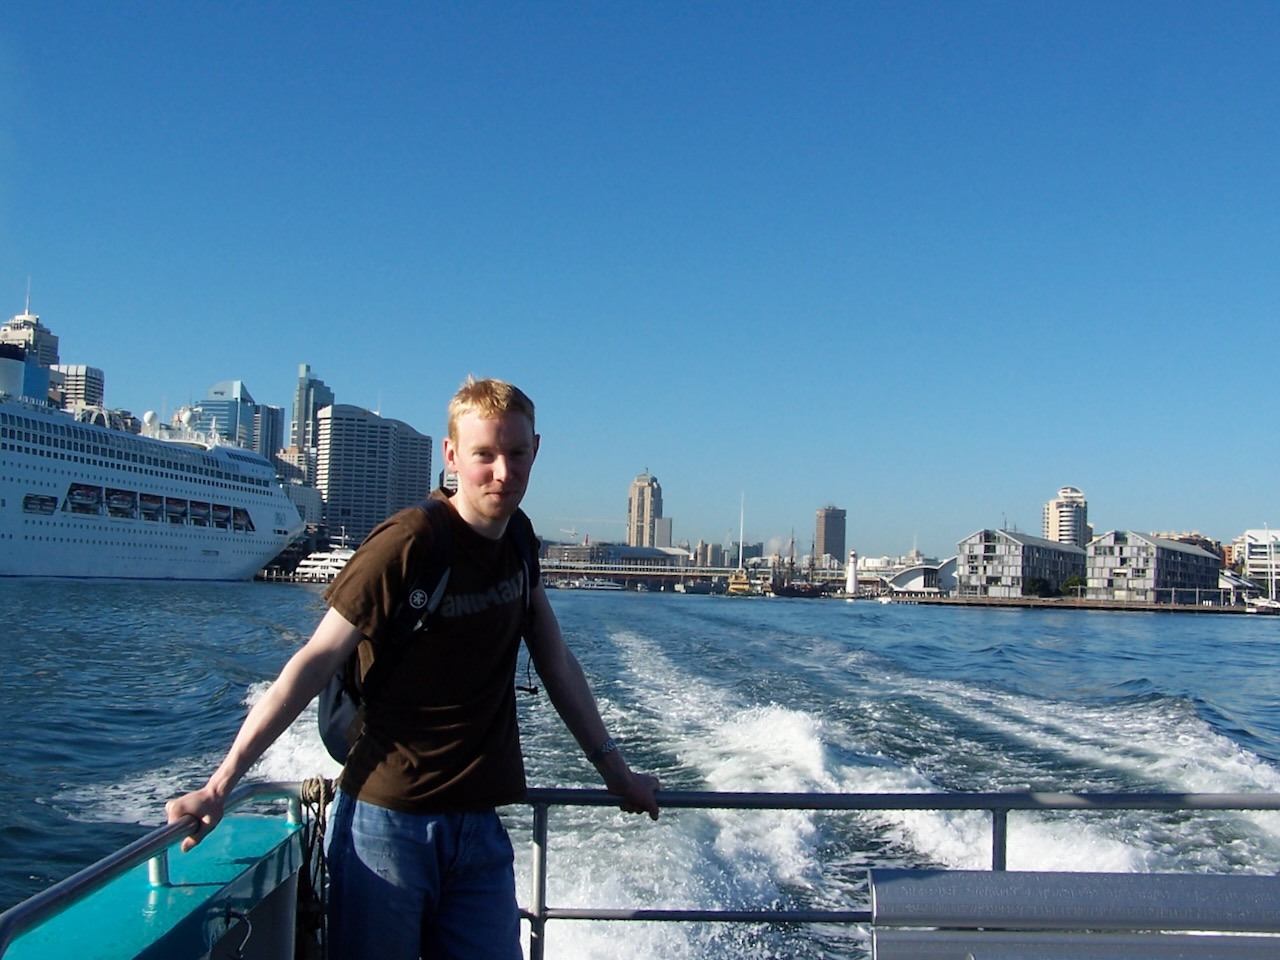 Me on the ferry to Olympic Park